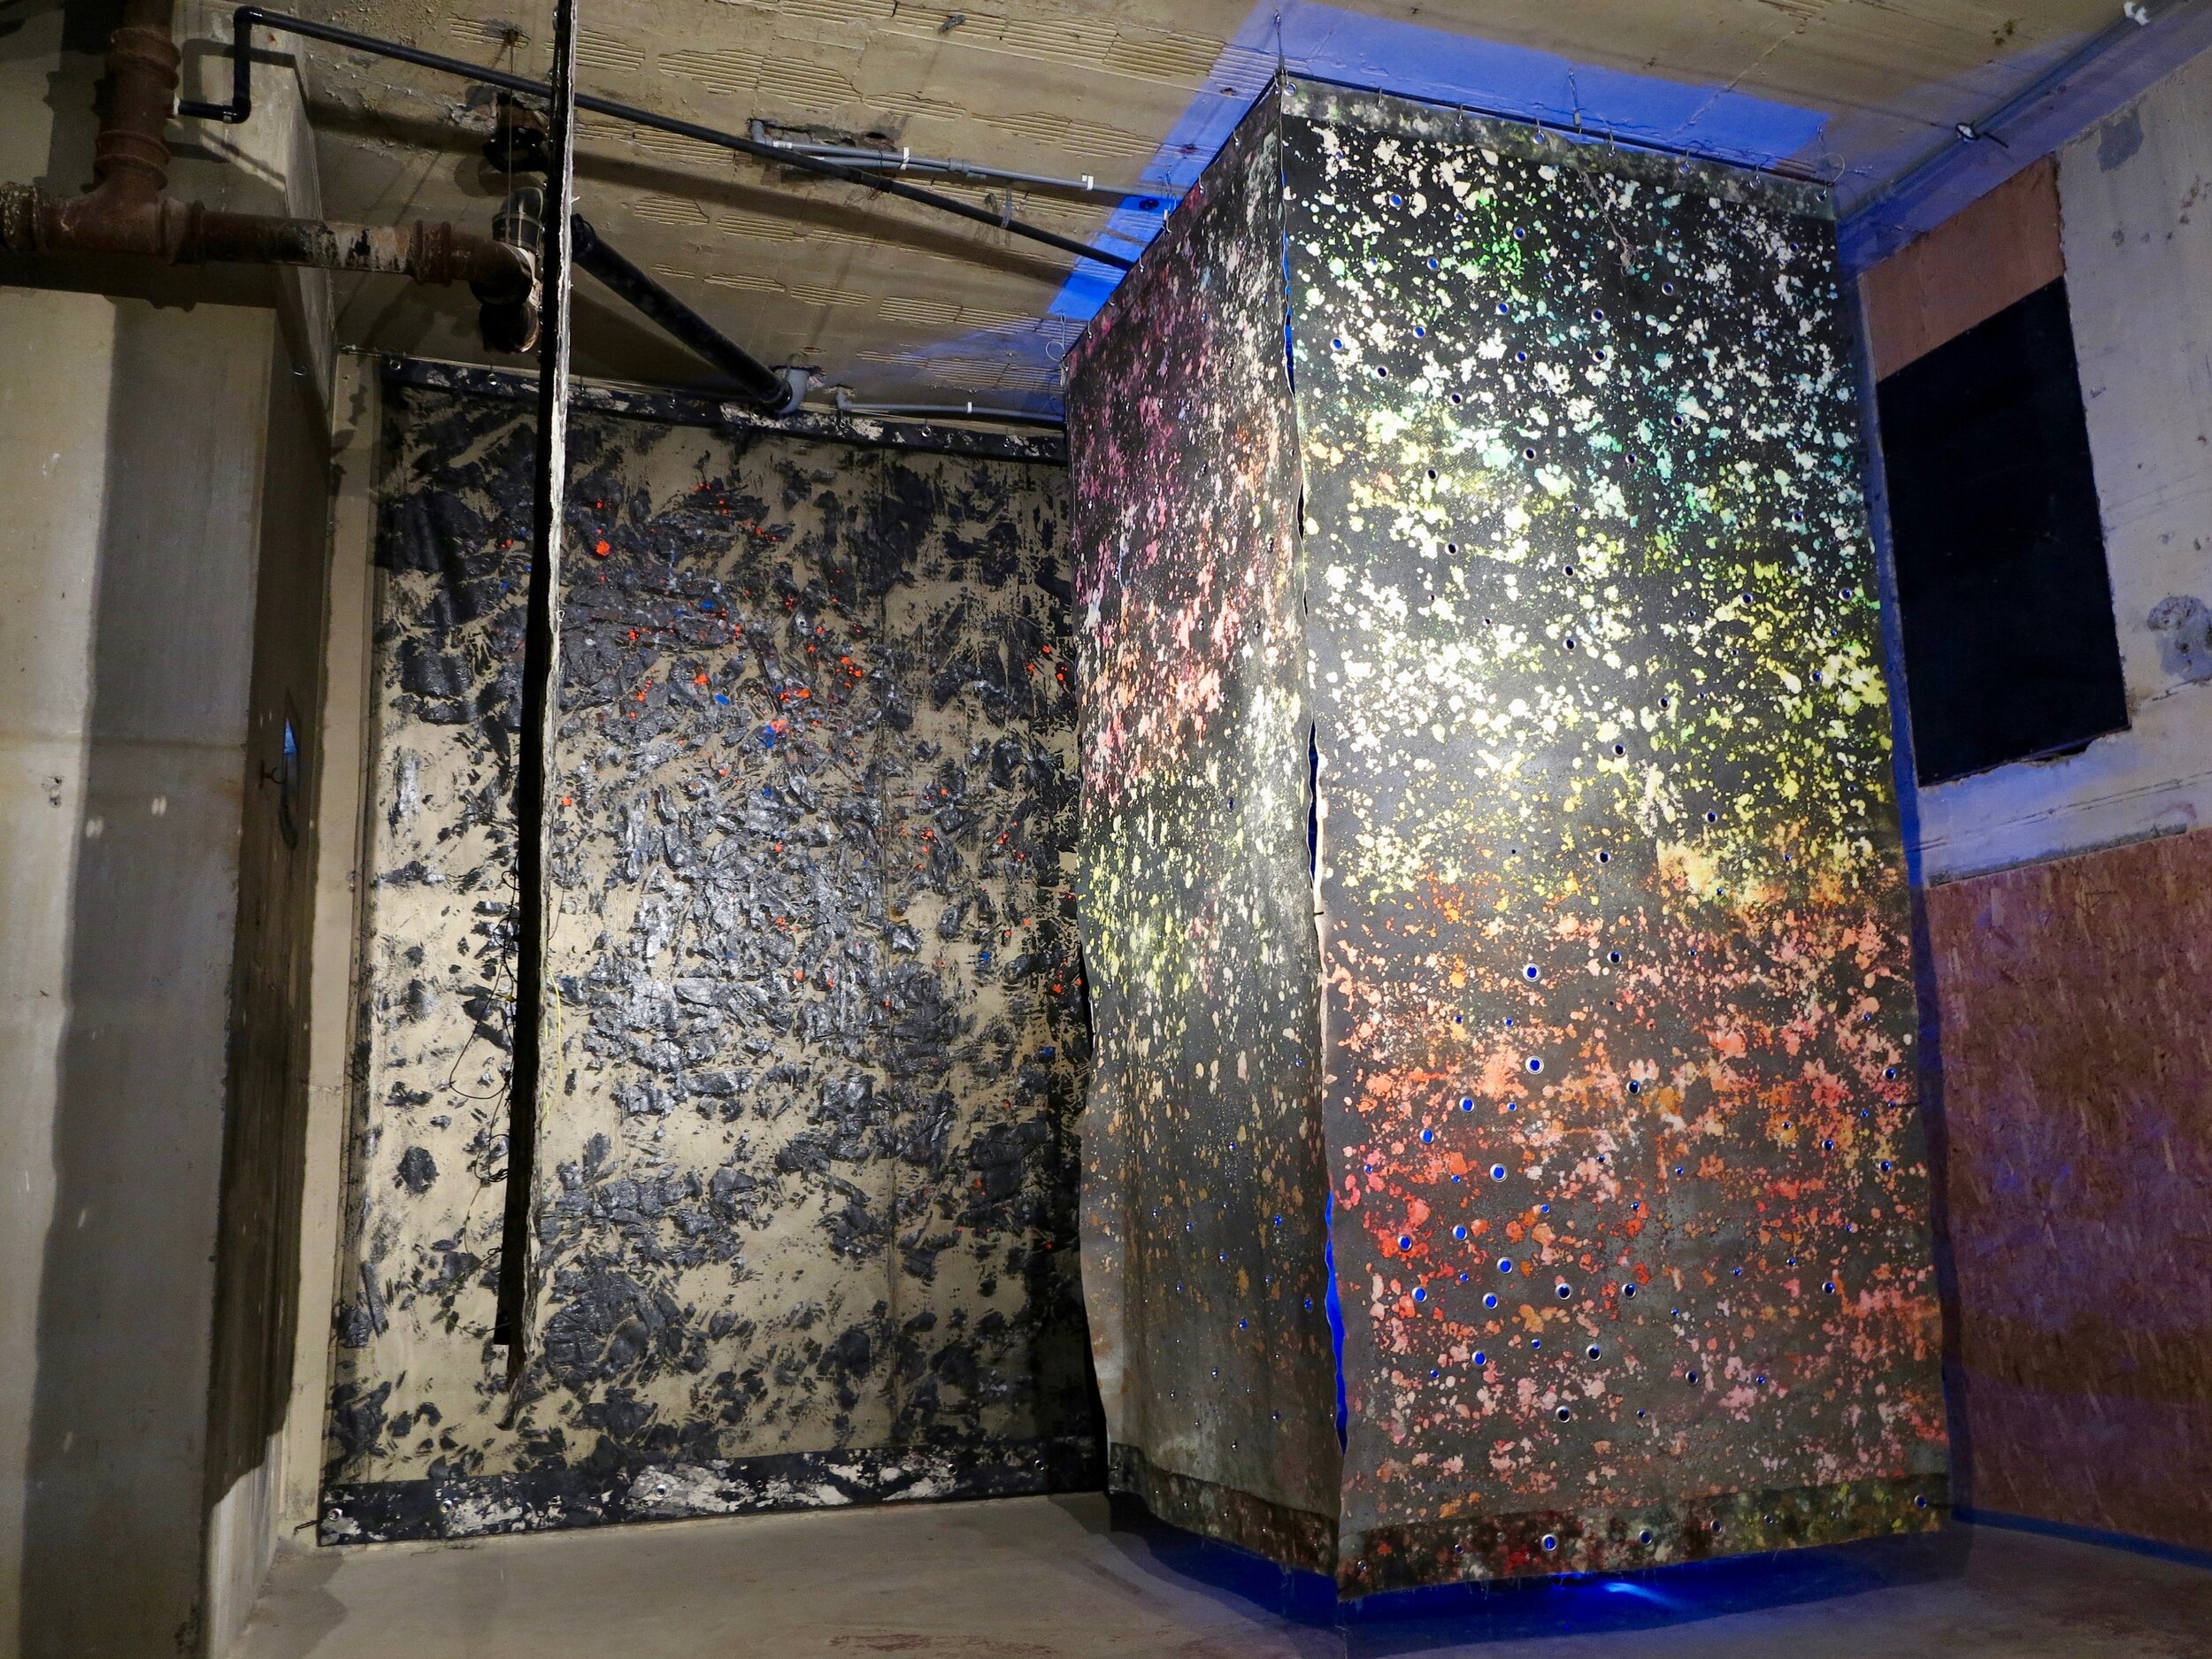   ACIDIC BLOC  installation view.  Alkyd resin, sand, brass, rubber, polyethylene, canvas and steel.  410 x 480 x 460 cm.   Sugar Mountain  @ The Silver Building, London 2019. 